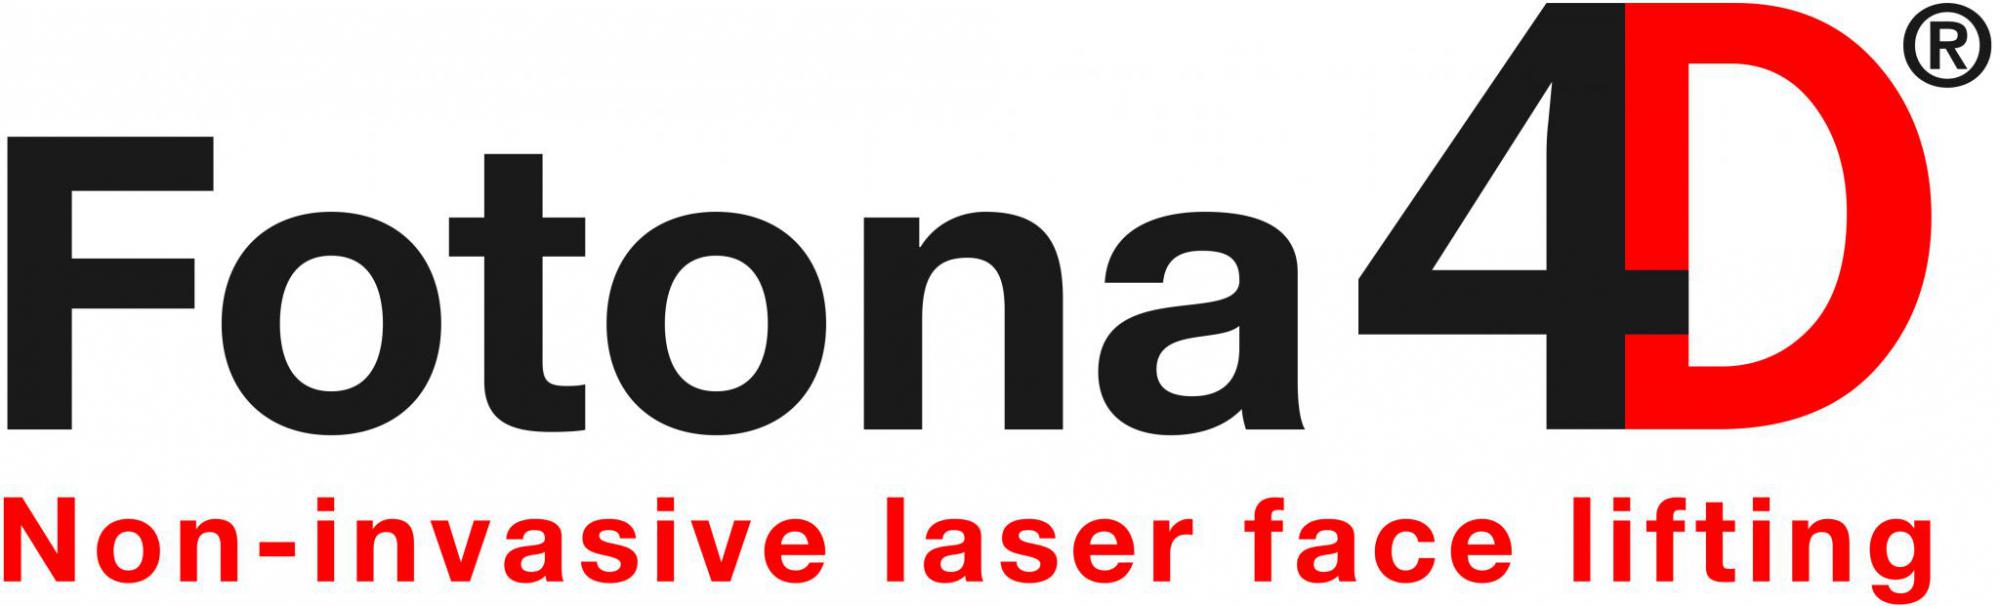 We offer our Fotona laser therapy to help people just like you